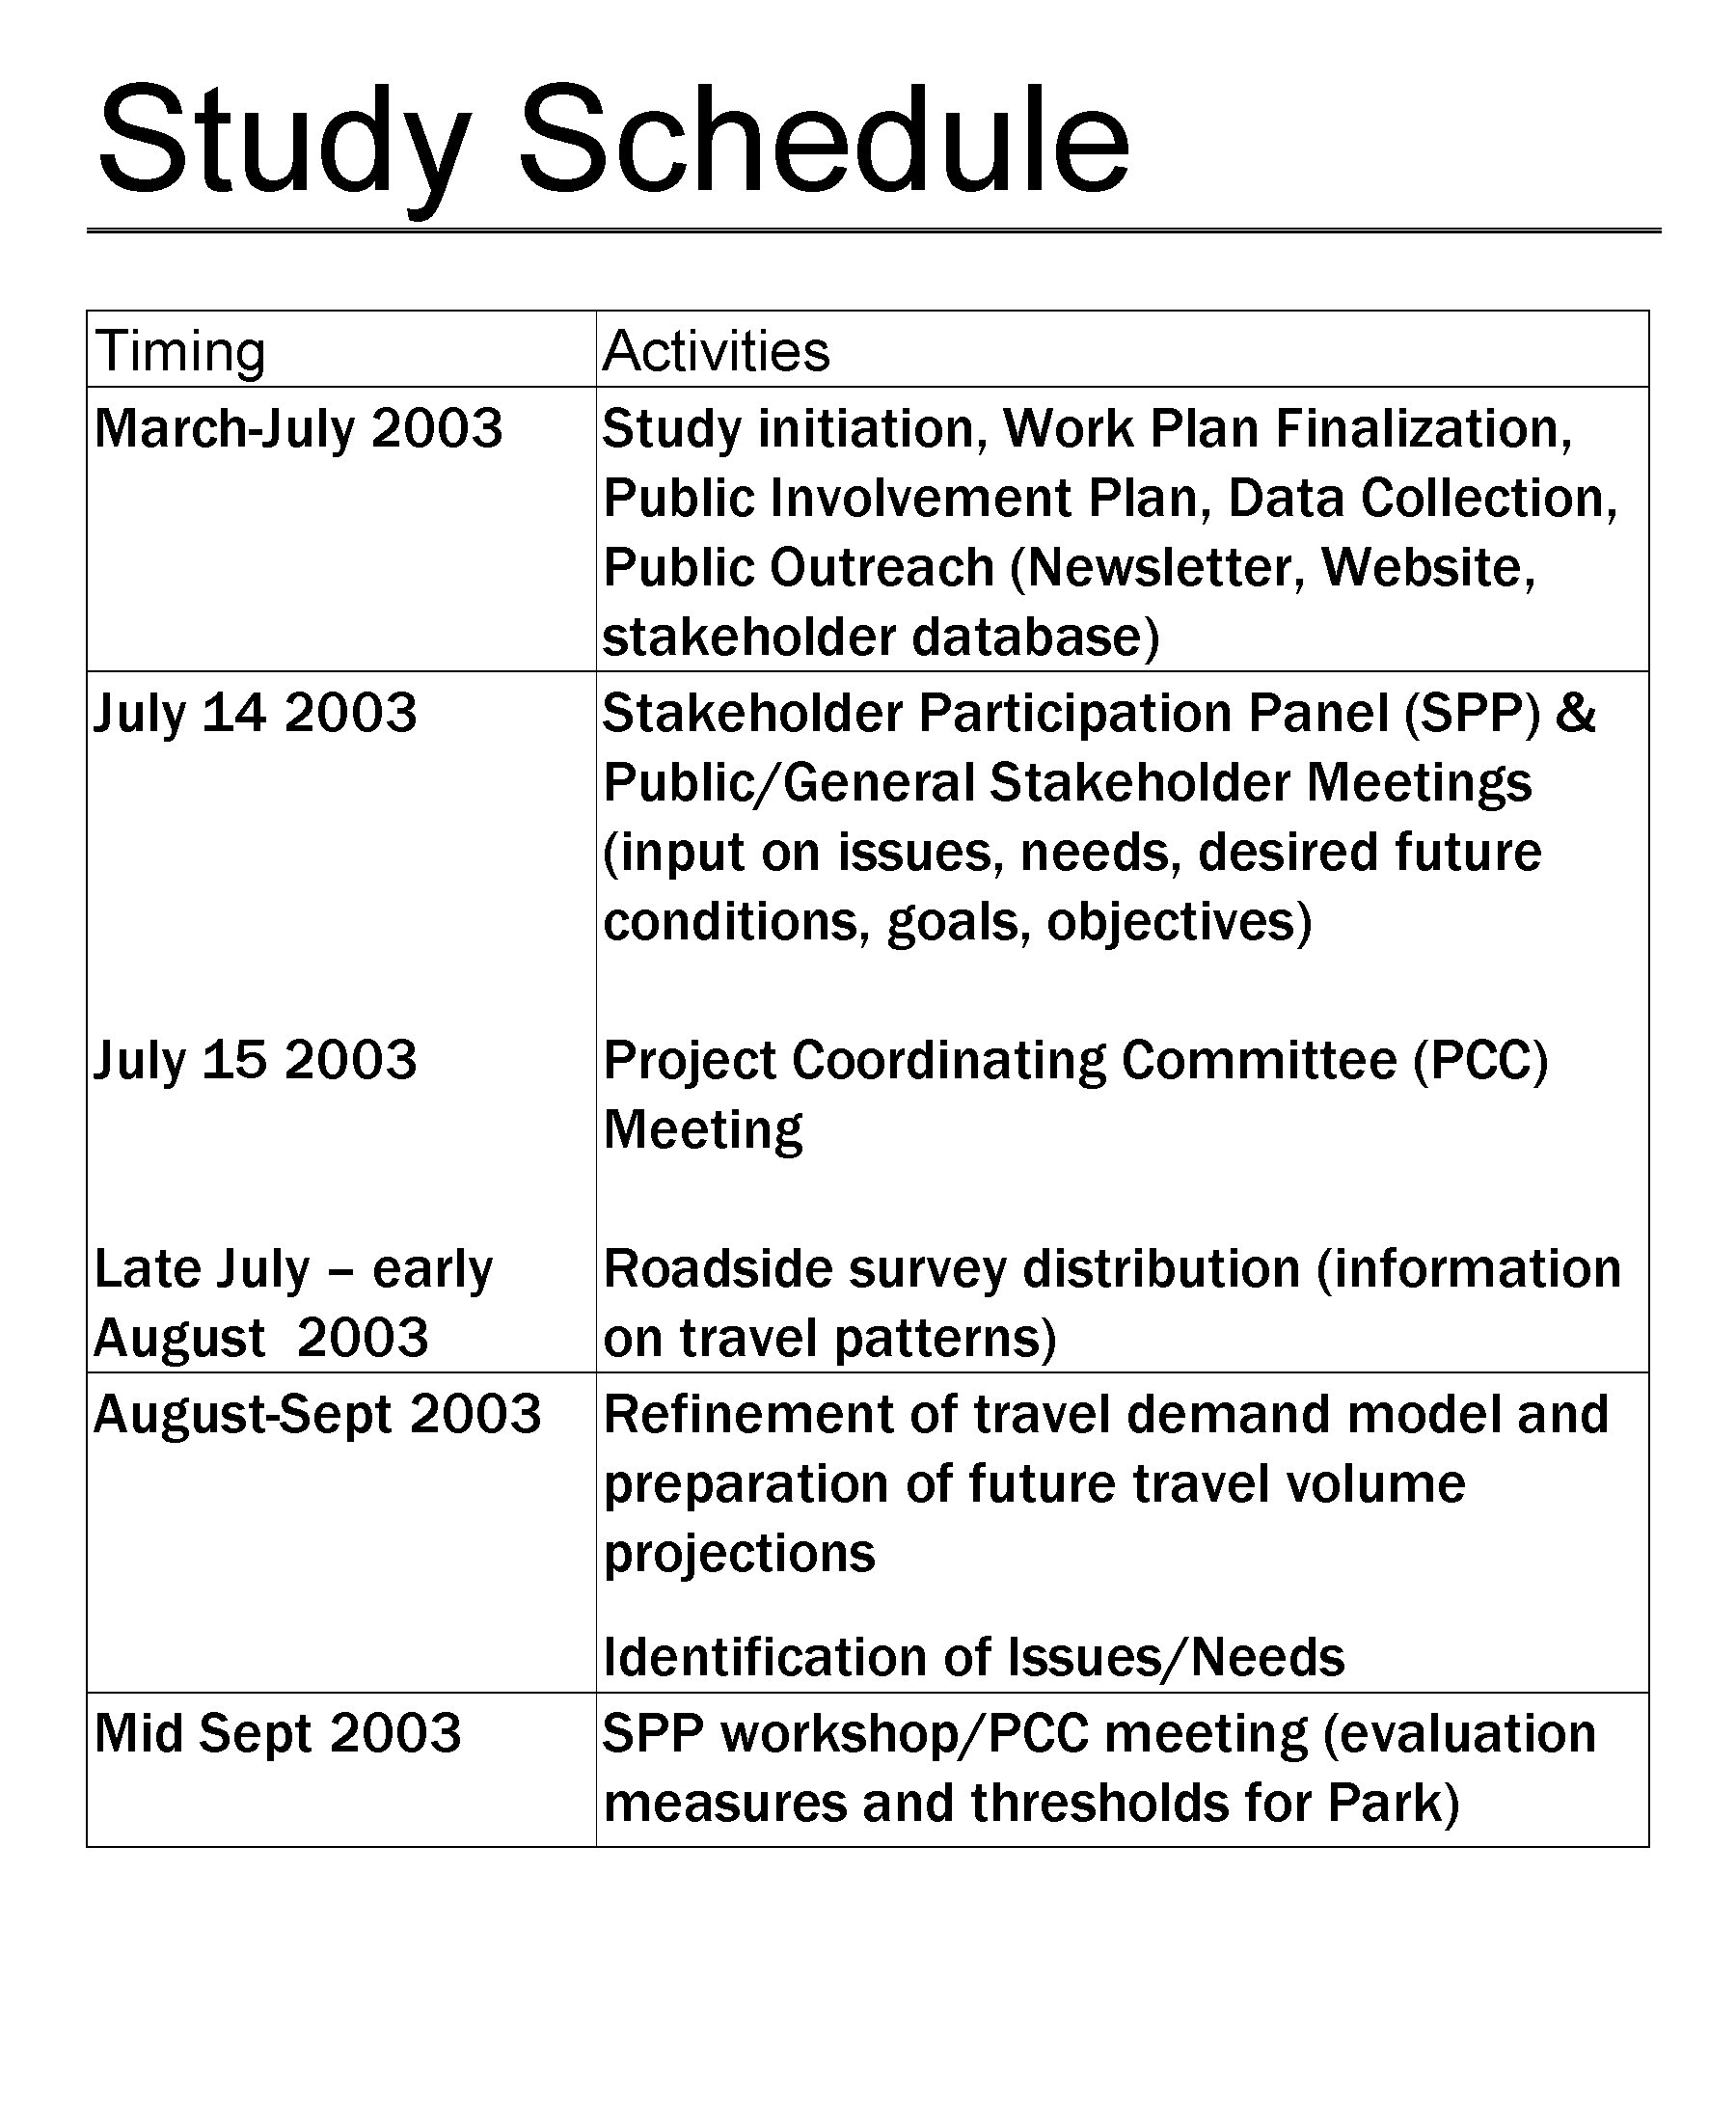 Study Schedule Timing March-July 2003 July 14 2003 Activities Study initiation, Work Plan Finalization,